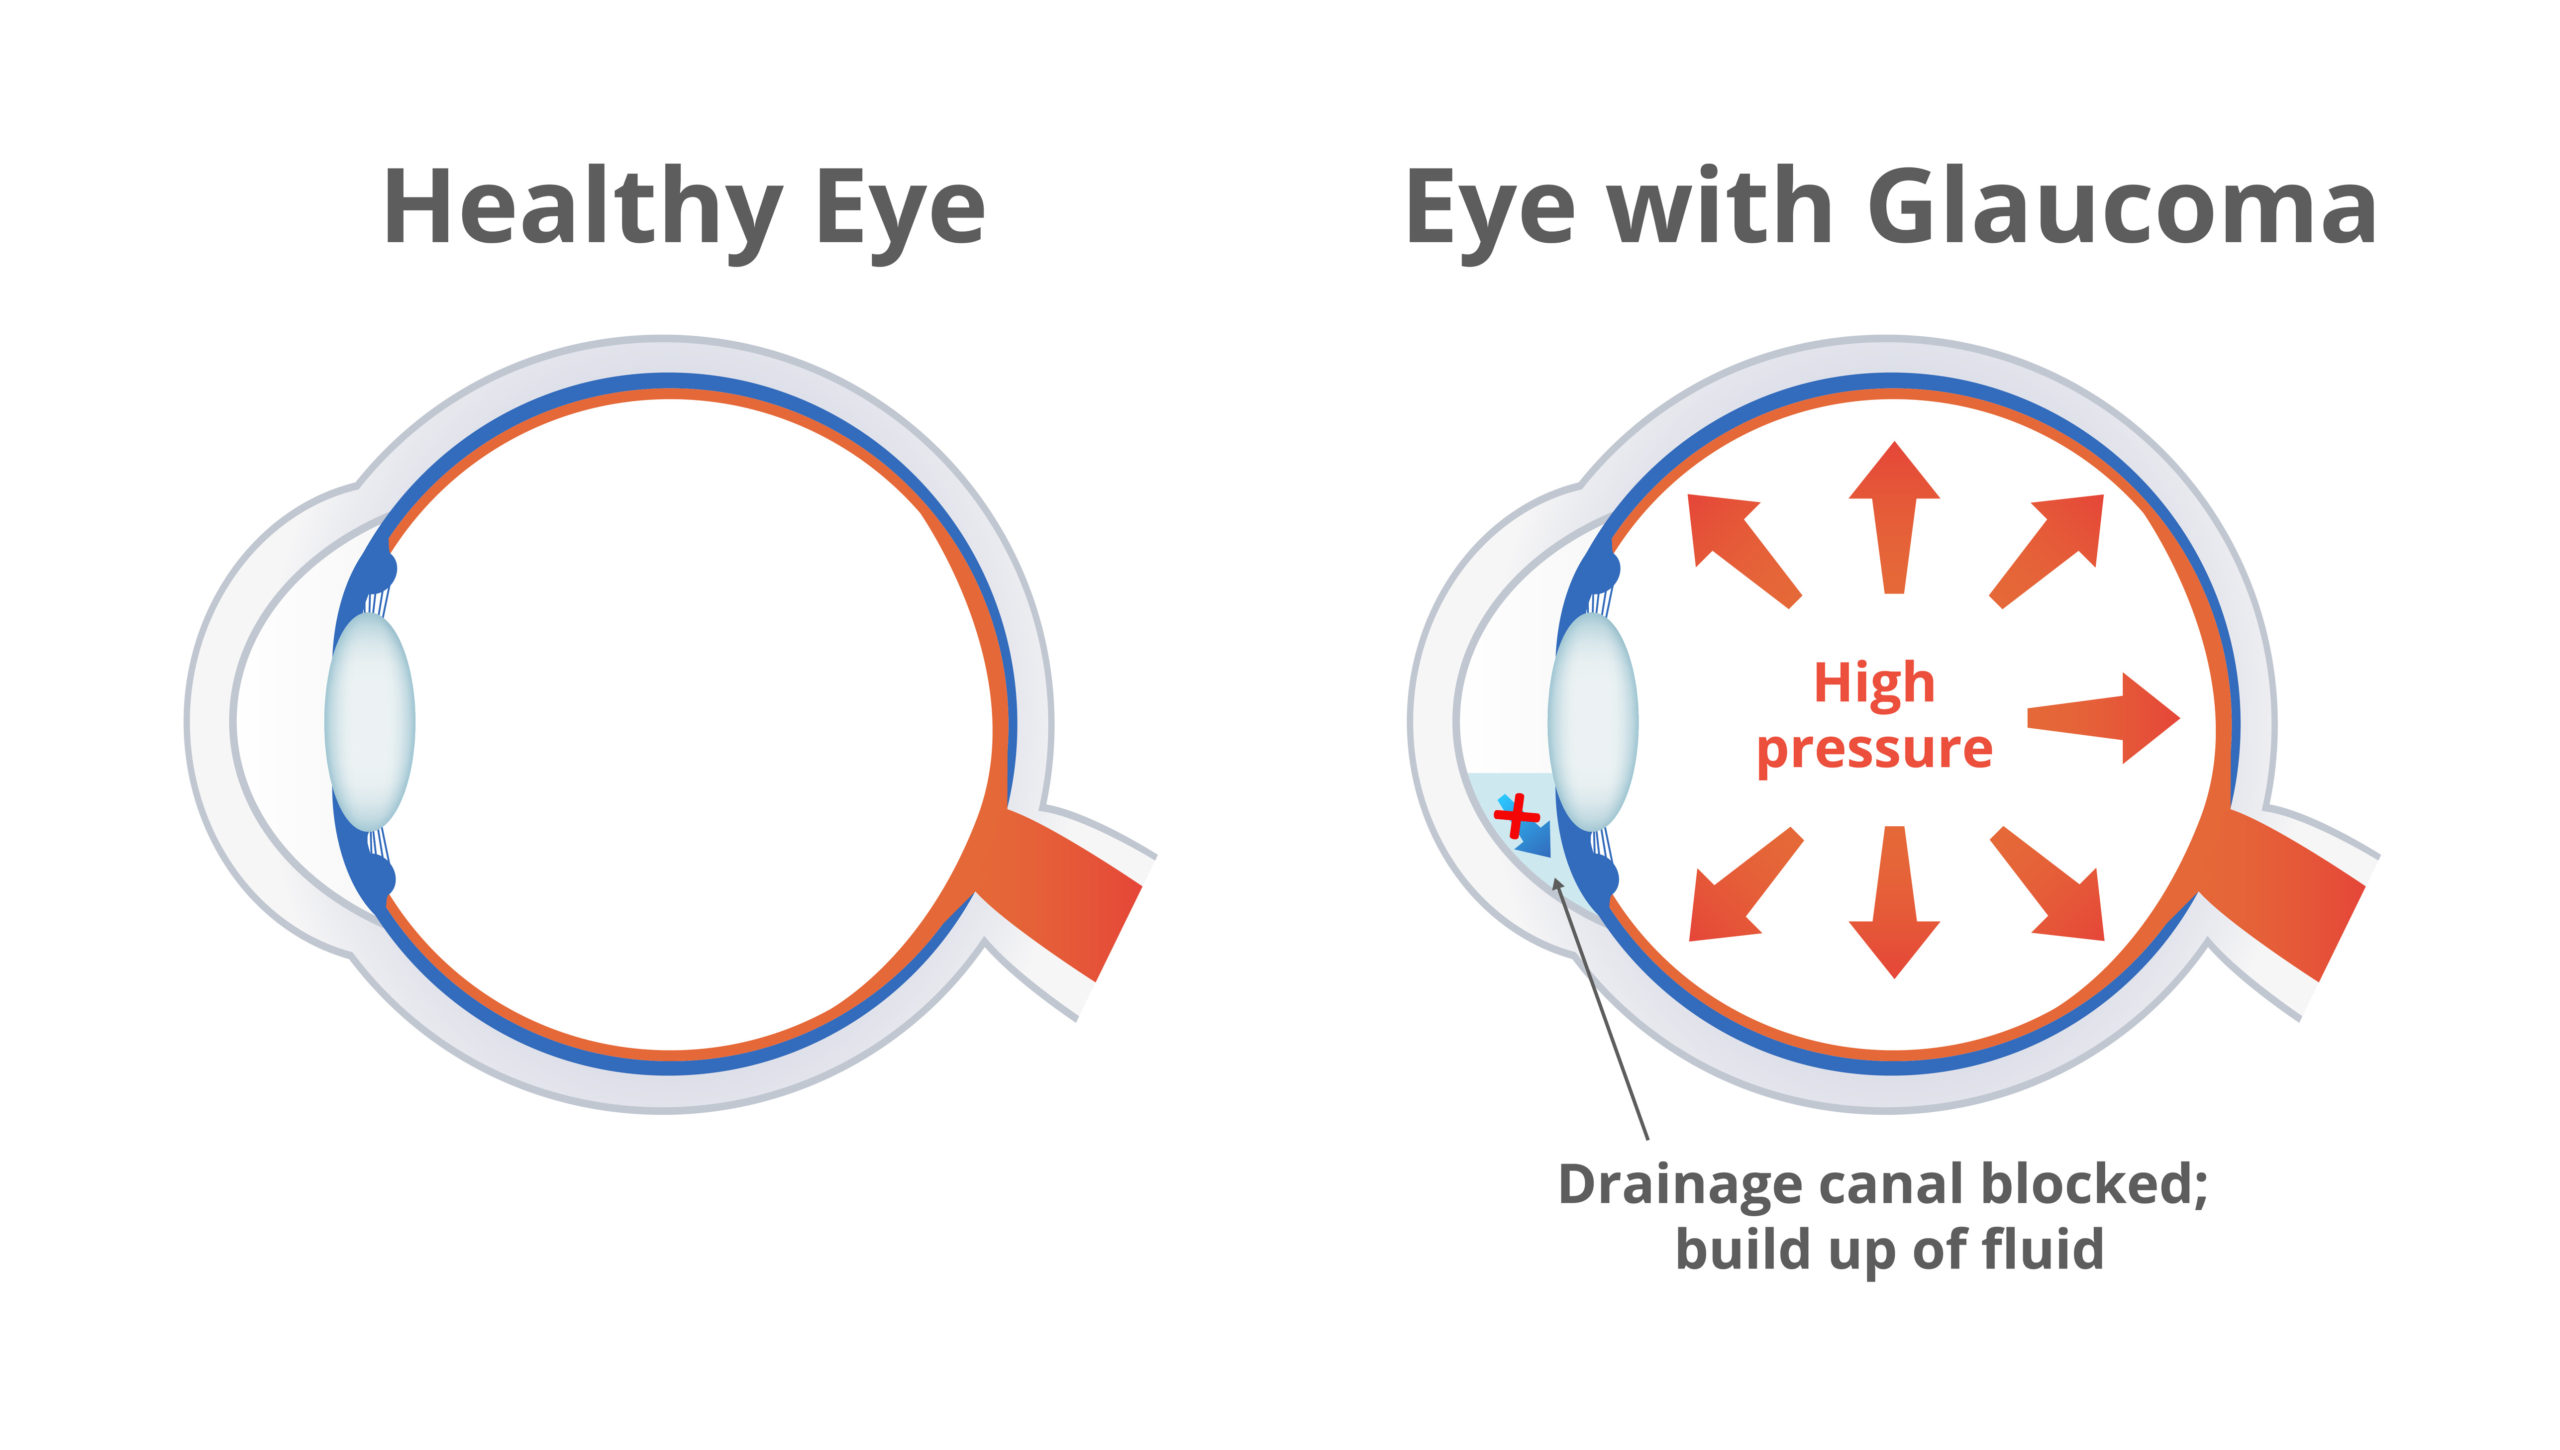 Vector illustration of a damaged eye with glaucoma and normal healthy eye isolated. High pressure in the eye damages optic nerves, drainage canal blocked, aqueous humor fluid is build up in the eye.